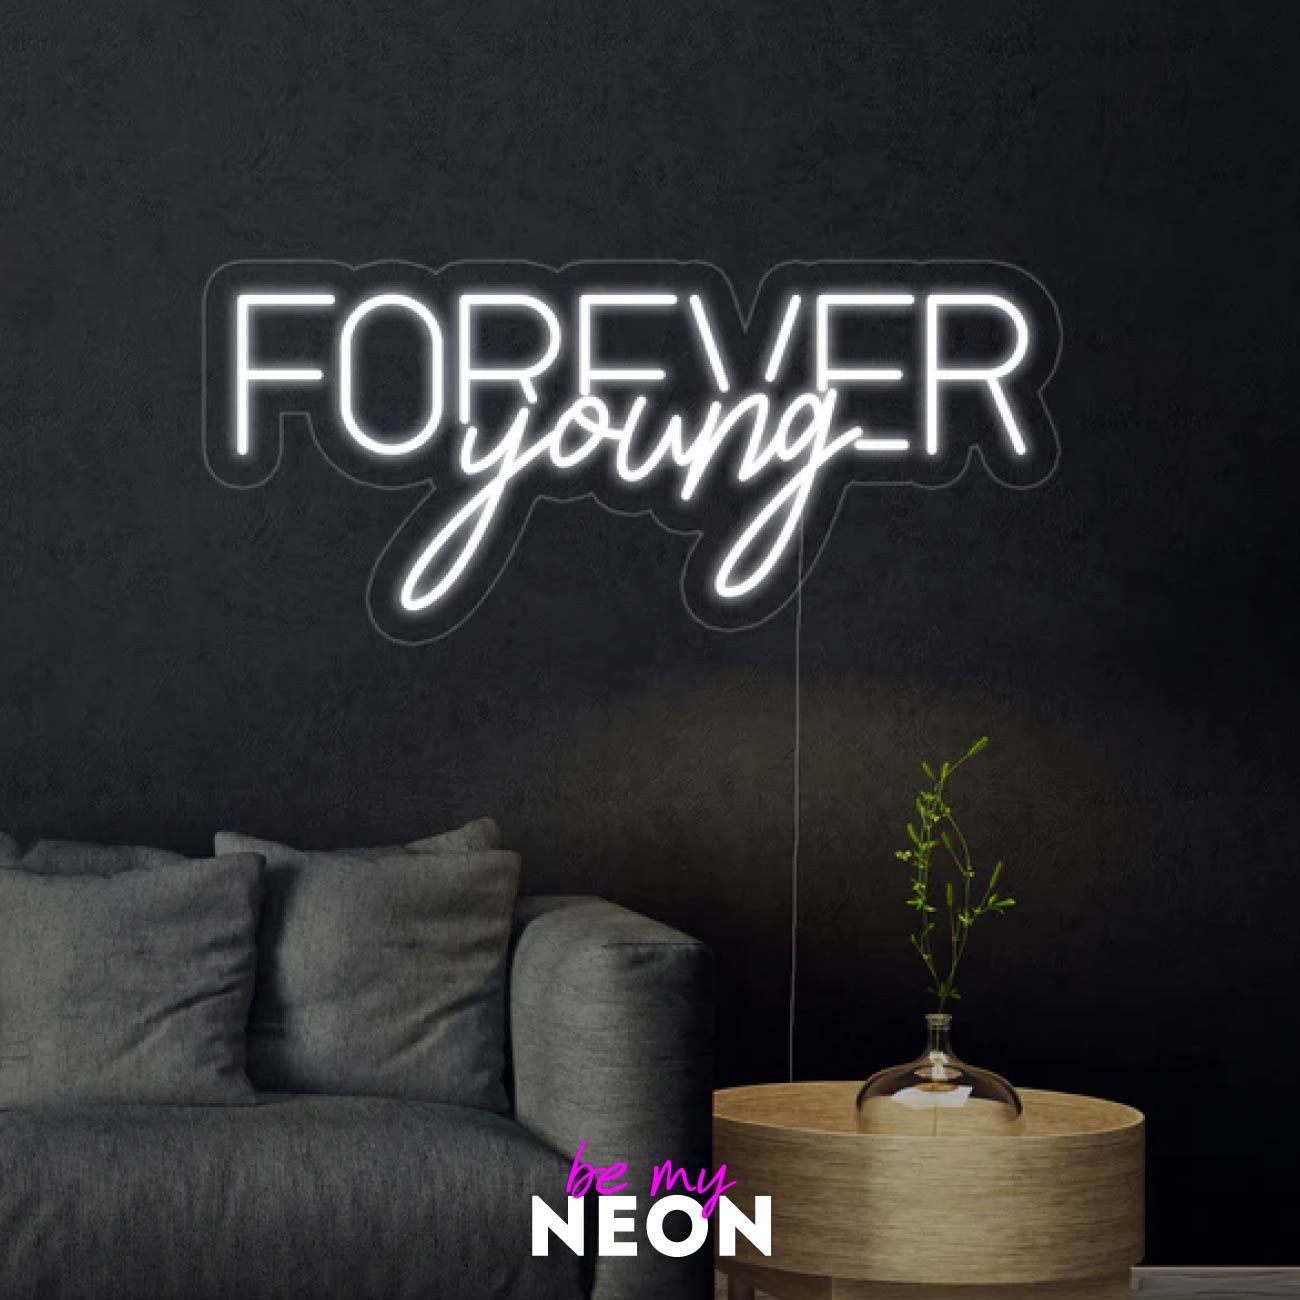 "FOREVER young" LED Neonschild